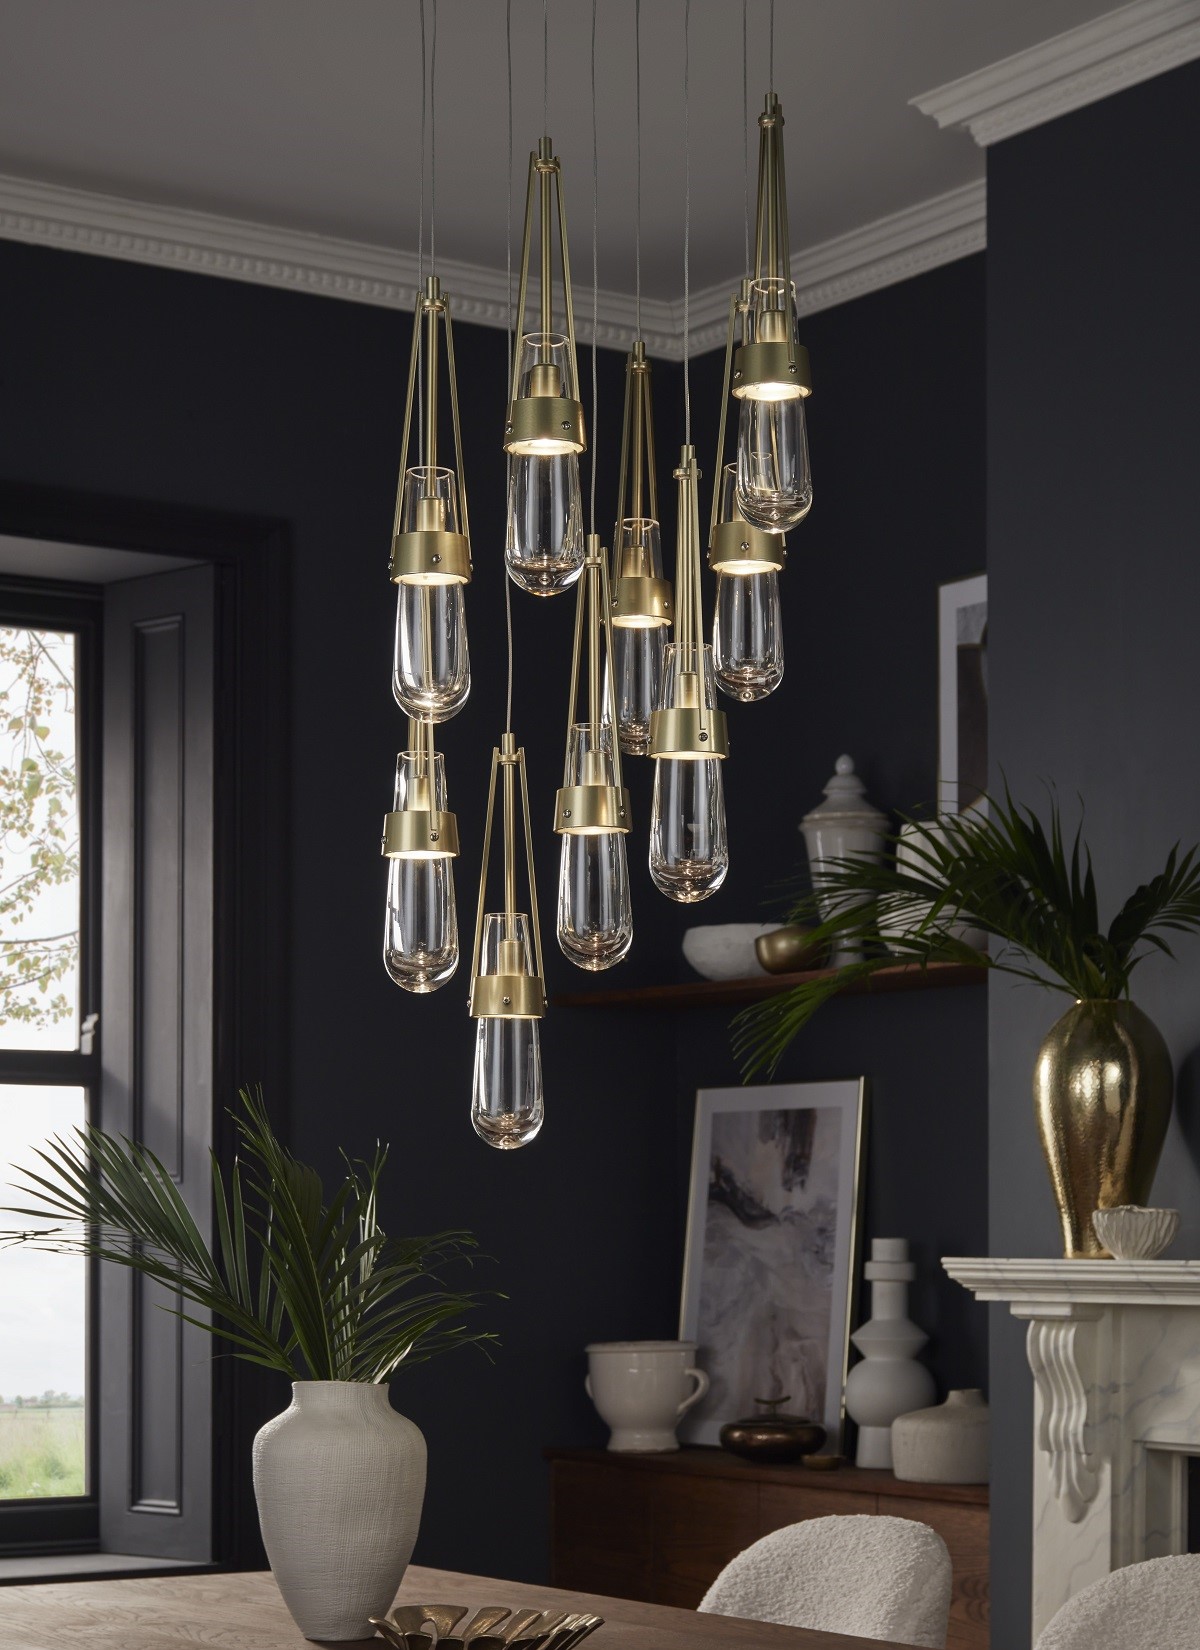 nine pendant lighting cluster as a statement light above dining table